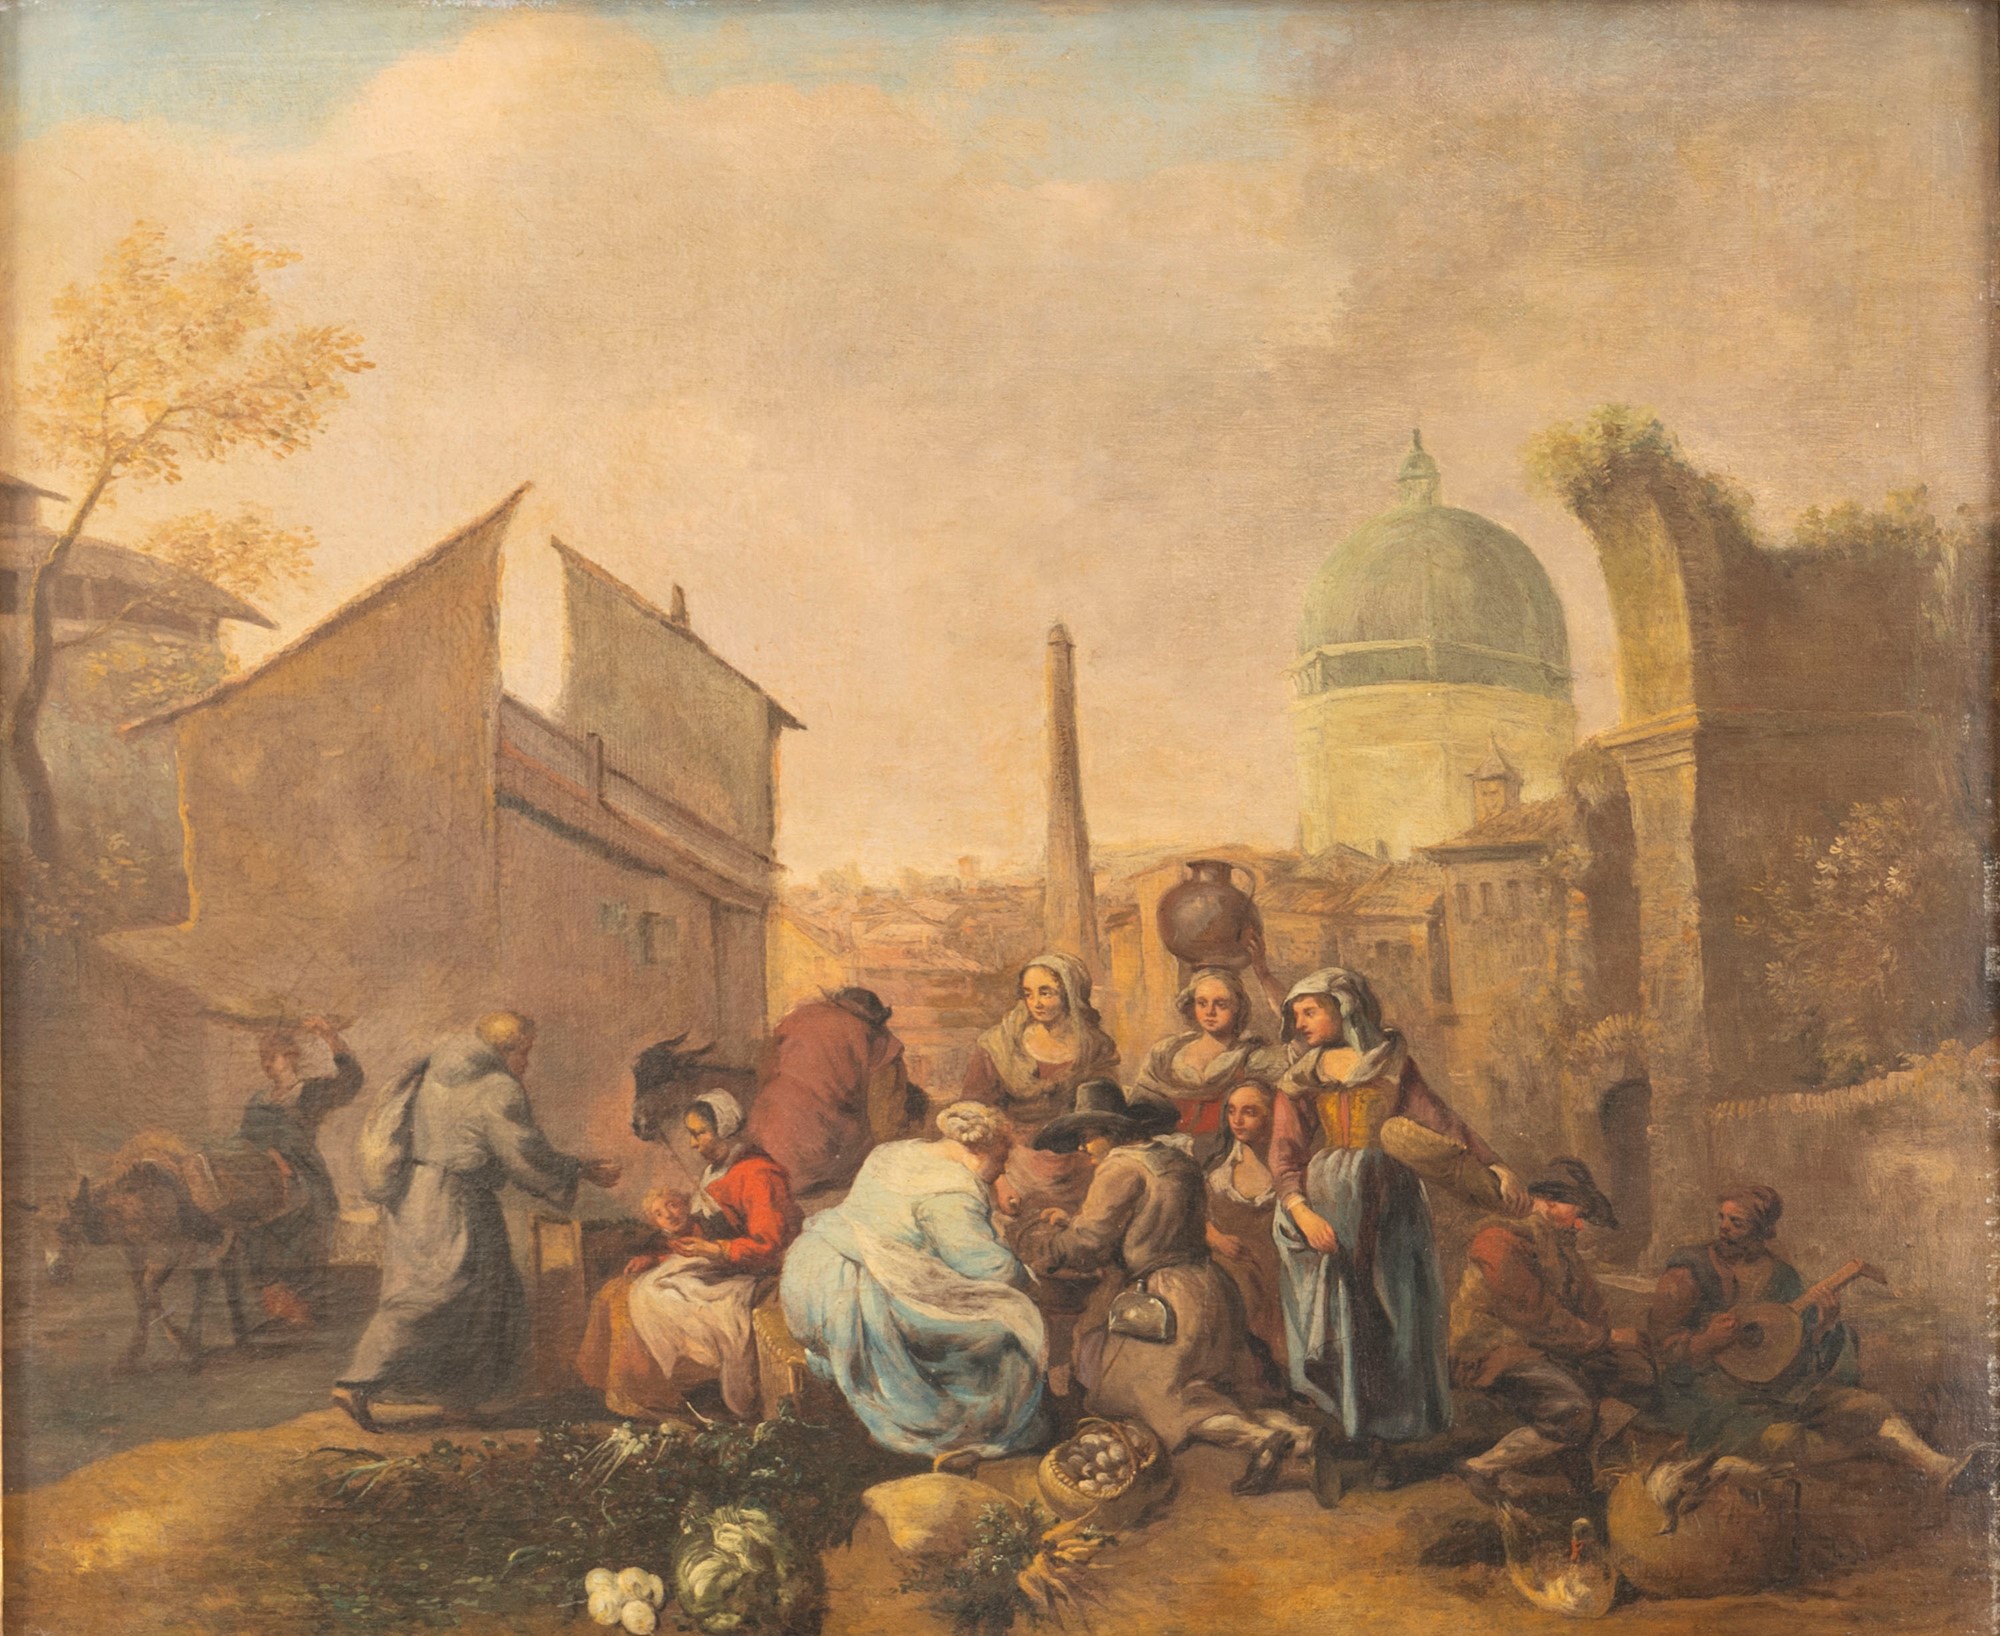 Circle of Hendrick Mommers (1623 - 1693) - Two market scenes with views of Rome in the background - Image 5 of 7